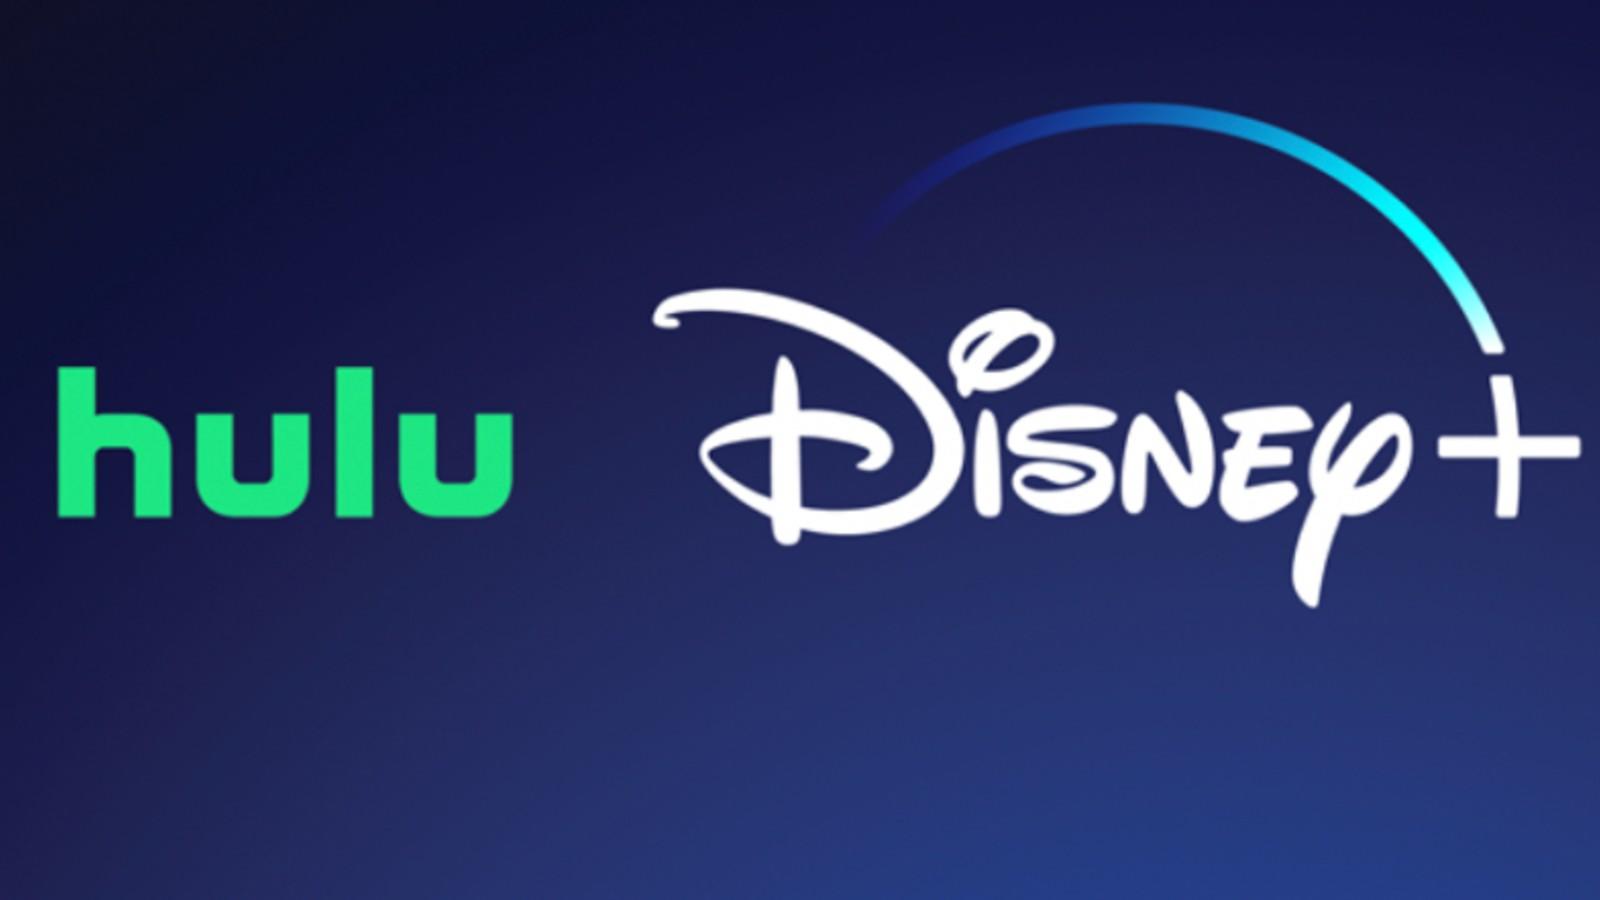 Password Sharing Rules for Hulu, Prime Video, Max and Others